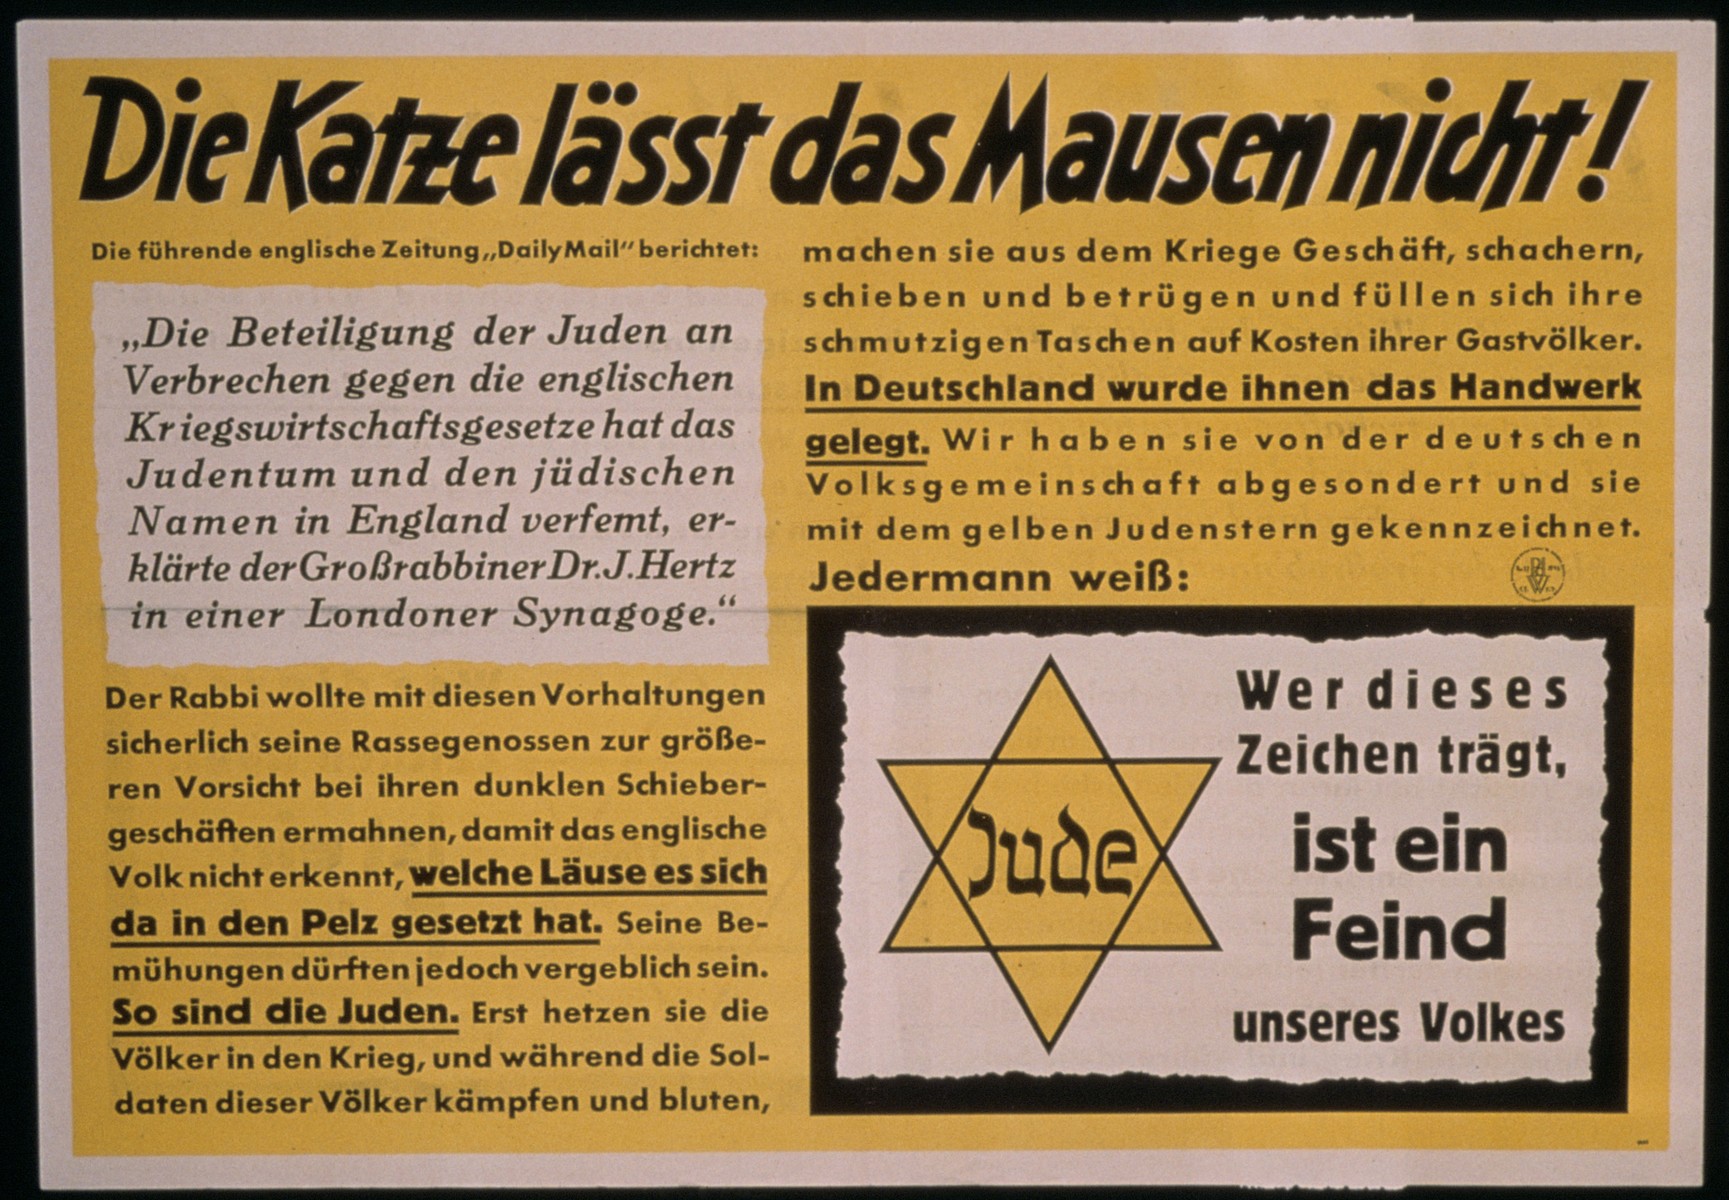 An antisemitic Nazi propaganda poster entitled, "The cats will not let the mice be!" 

Jews are defined as the enemy of the German people.  The smaller sign at the lower left reads:  "Whoever wears this badge is an enemy of our people."  In the text at the upper left is a quotation from a statement made by Chief Rabbi Hertz of London about the harm done by British Jews who engage in illegal war profiteering.